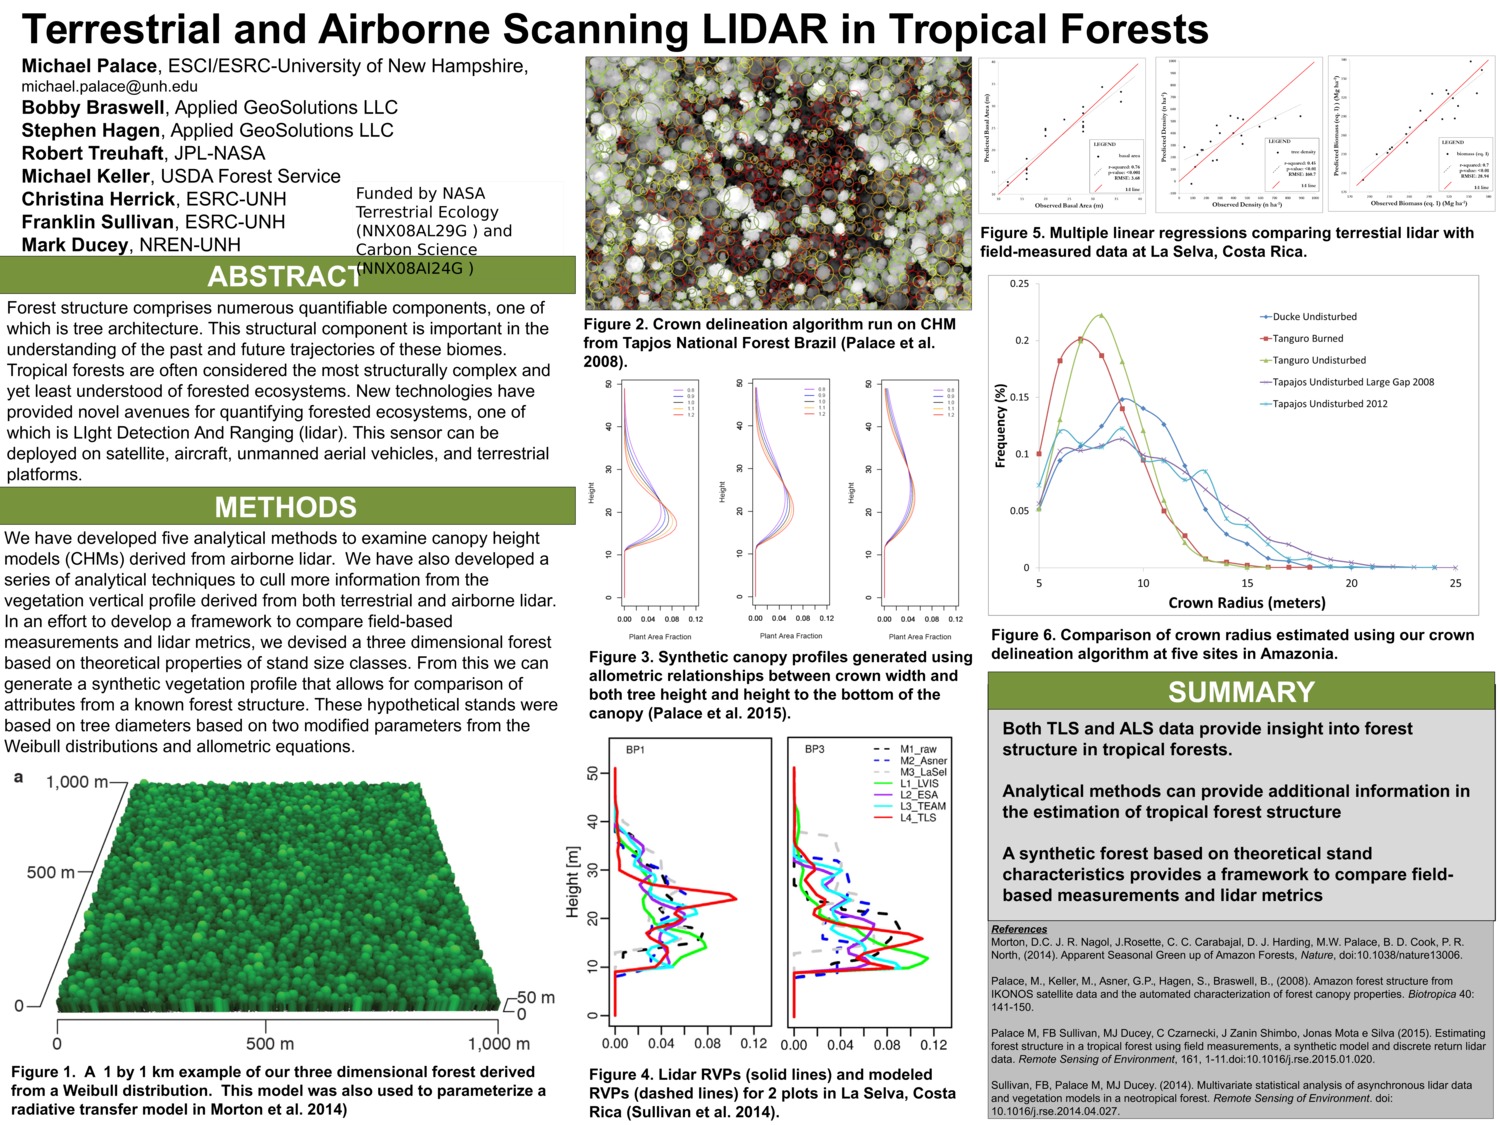 Terrestrial And Airborne Scanning Lidar In Tropical Forests by palace